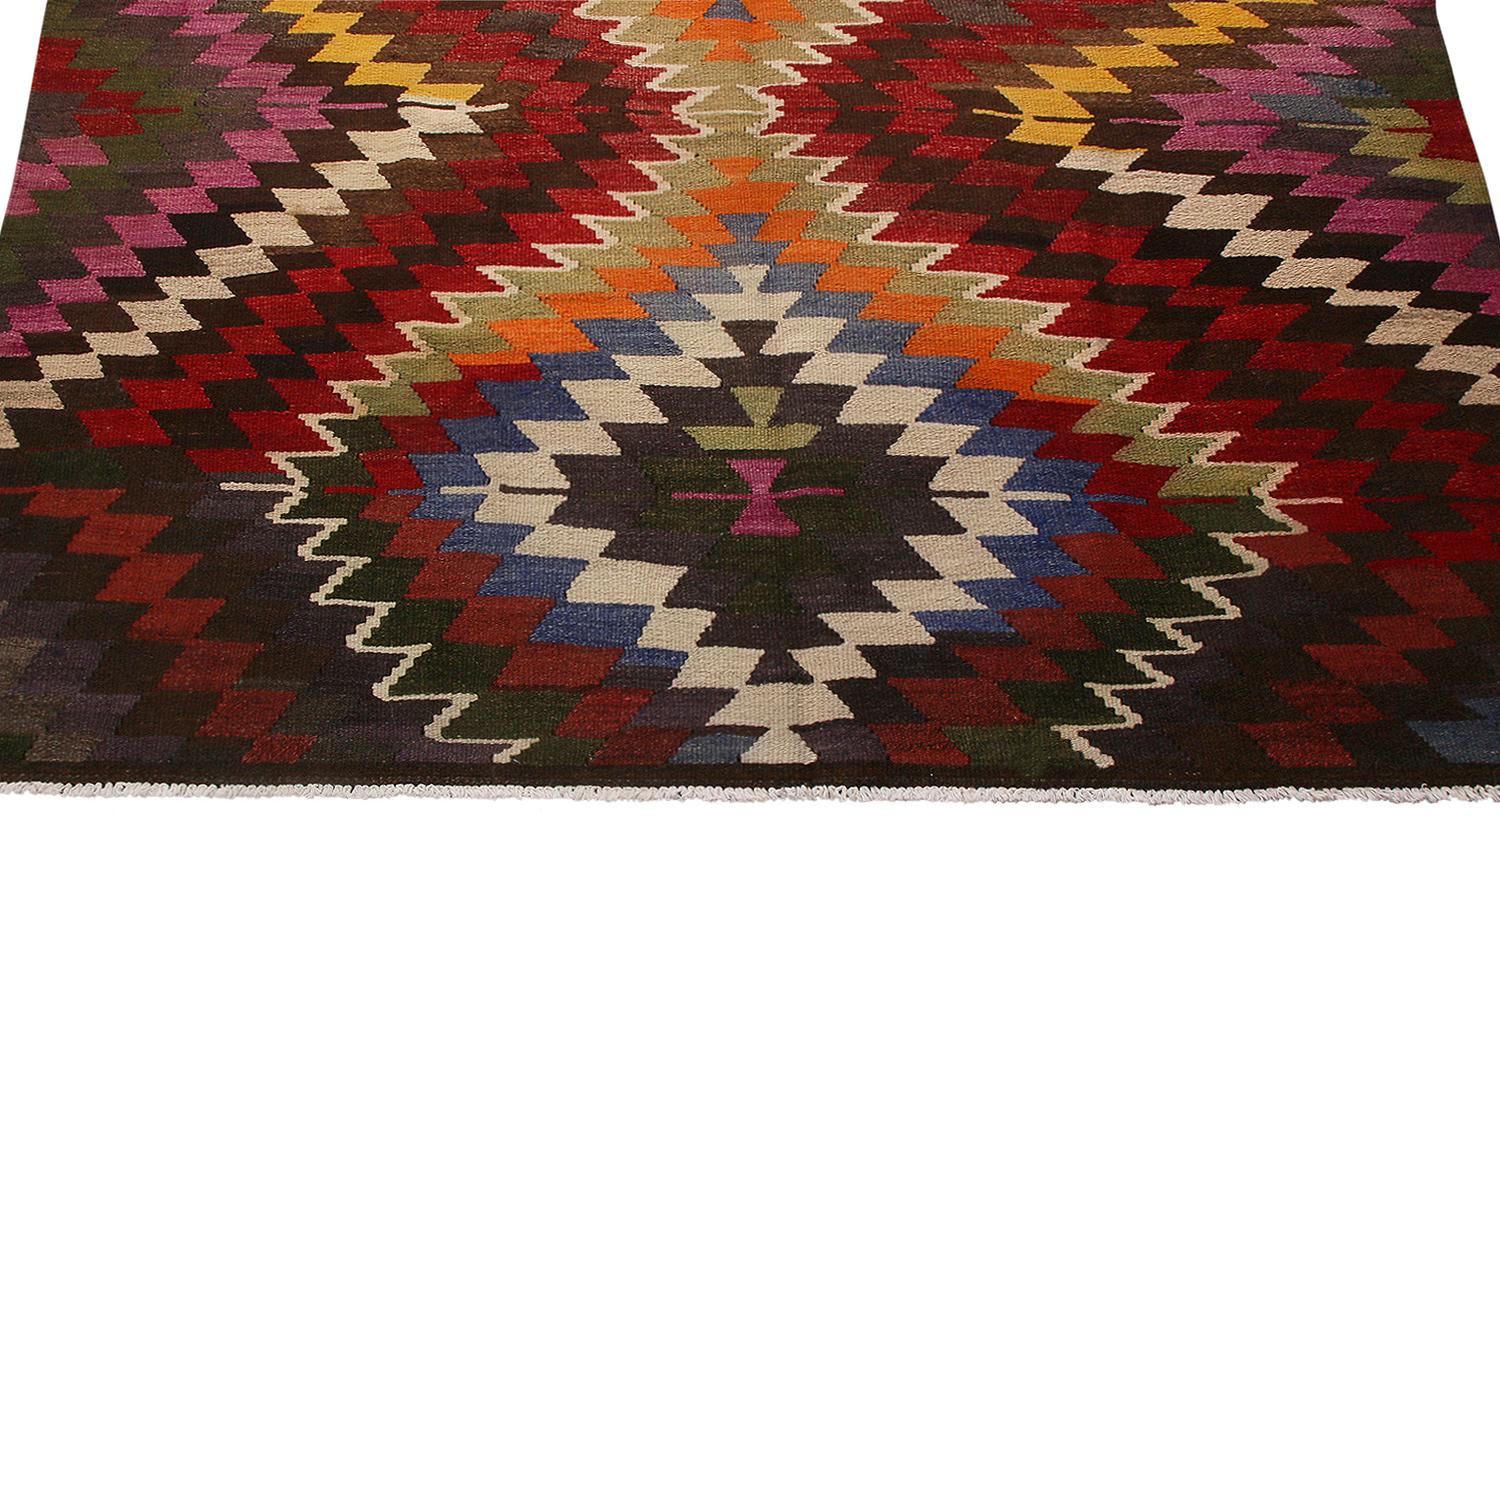 Vintage Midcentury Mut Diamond Beige-Brown Green Wool Kilim Rug by Rug & Kilim In Good Condition For Sale In Long Island City, NY